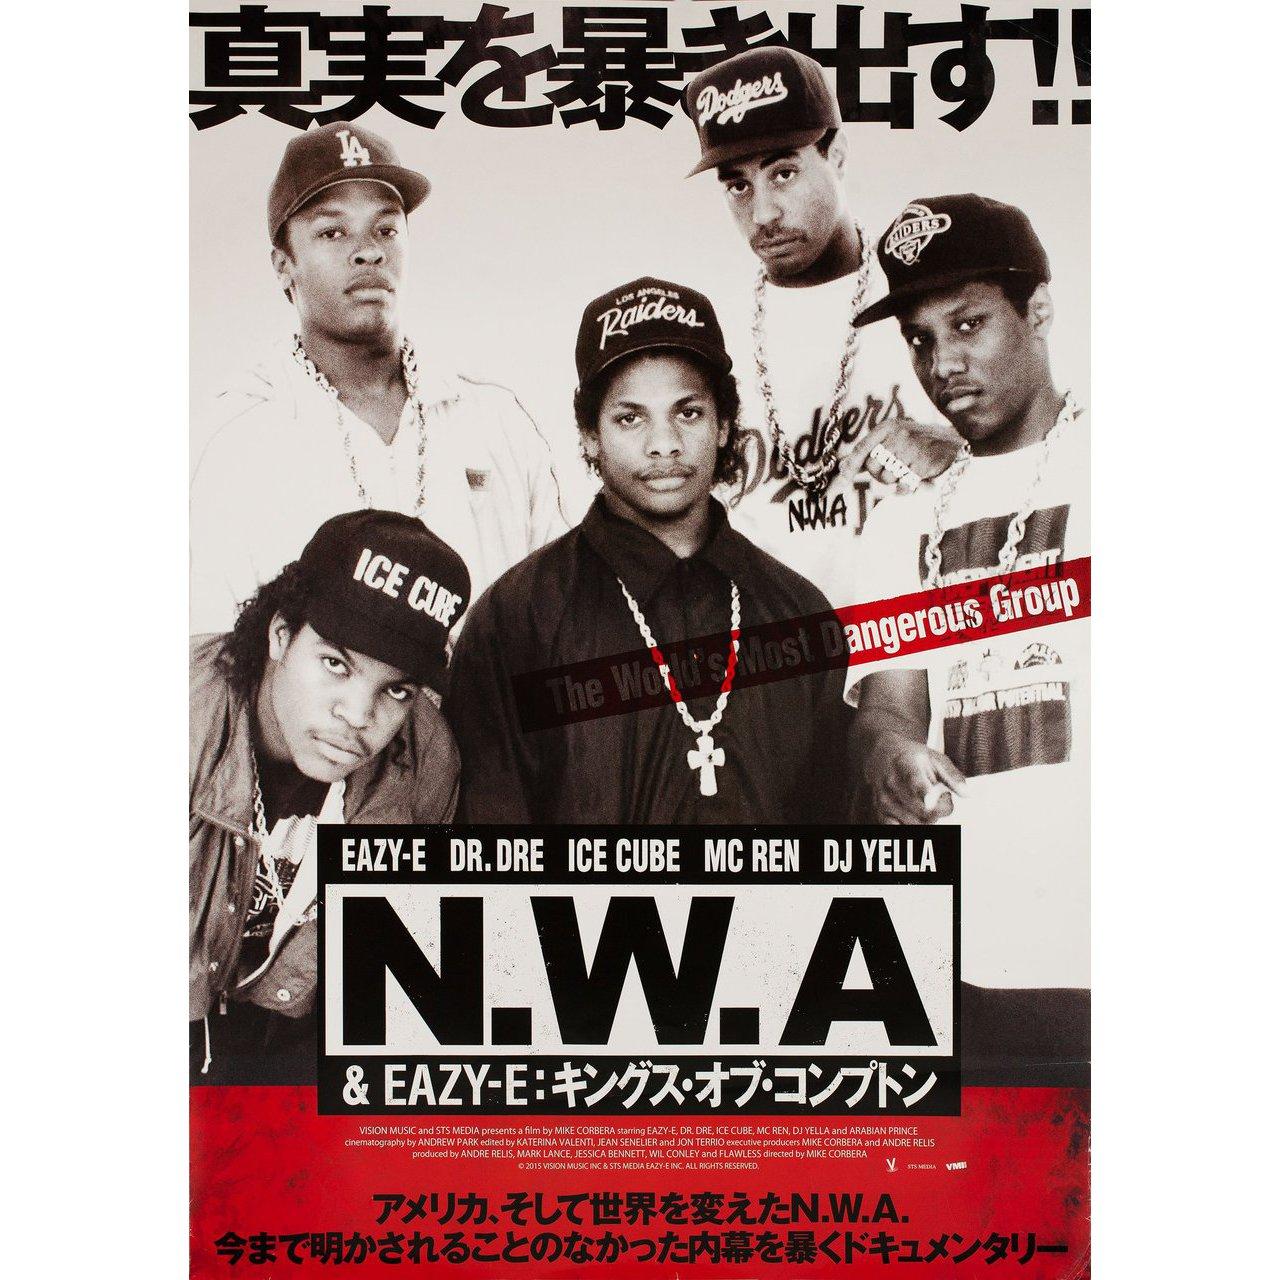 Original 2016 Japanese B1 poster for the film NWA & Eazy-E: Kings of Compton (NWA & Eazy-E: The Kings of Compton) directed by Mike Corbera / Andre Relis with Dr. Dre / Eazy-E / Ice Cube. Very good-fine condition, rolled. Please note: the size is